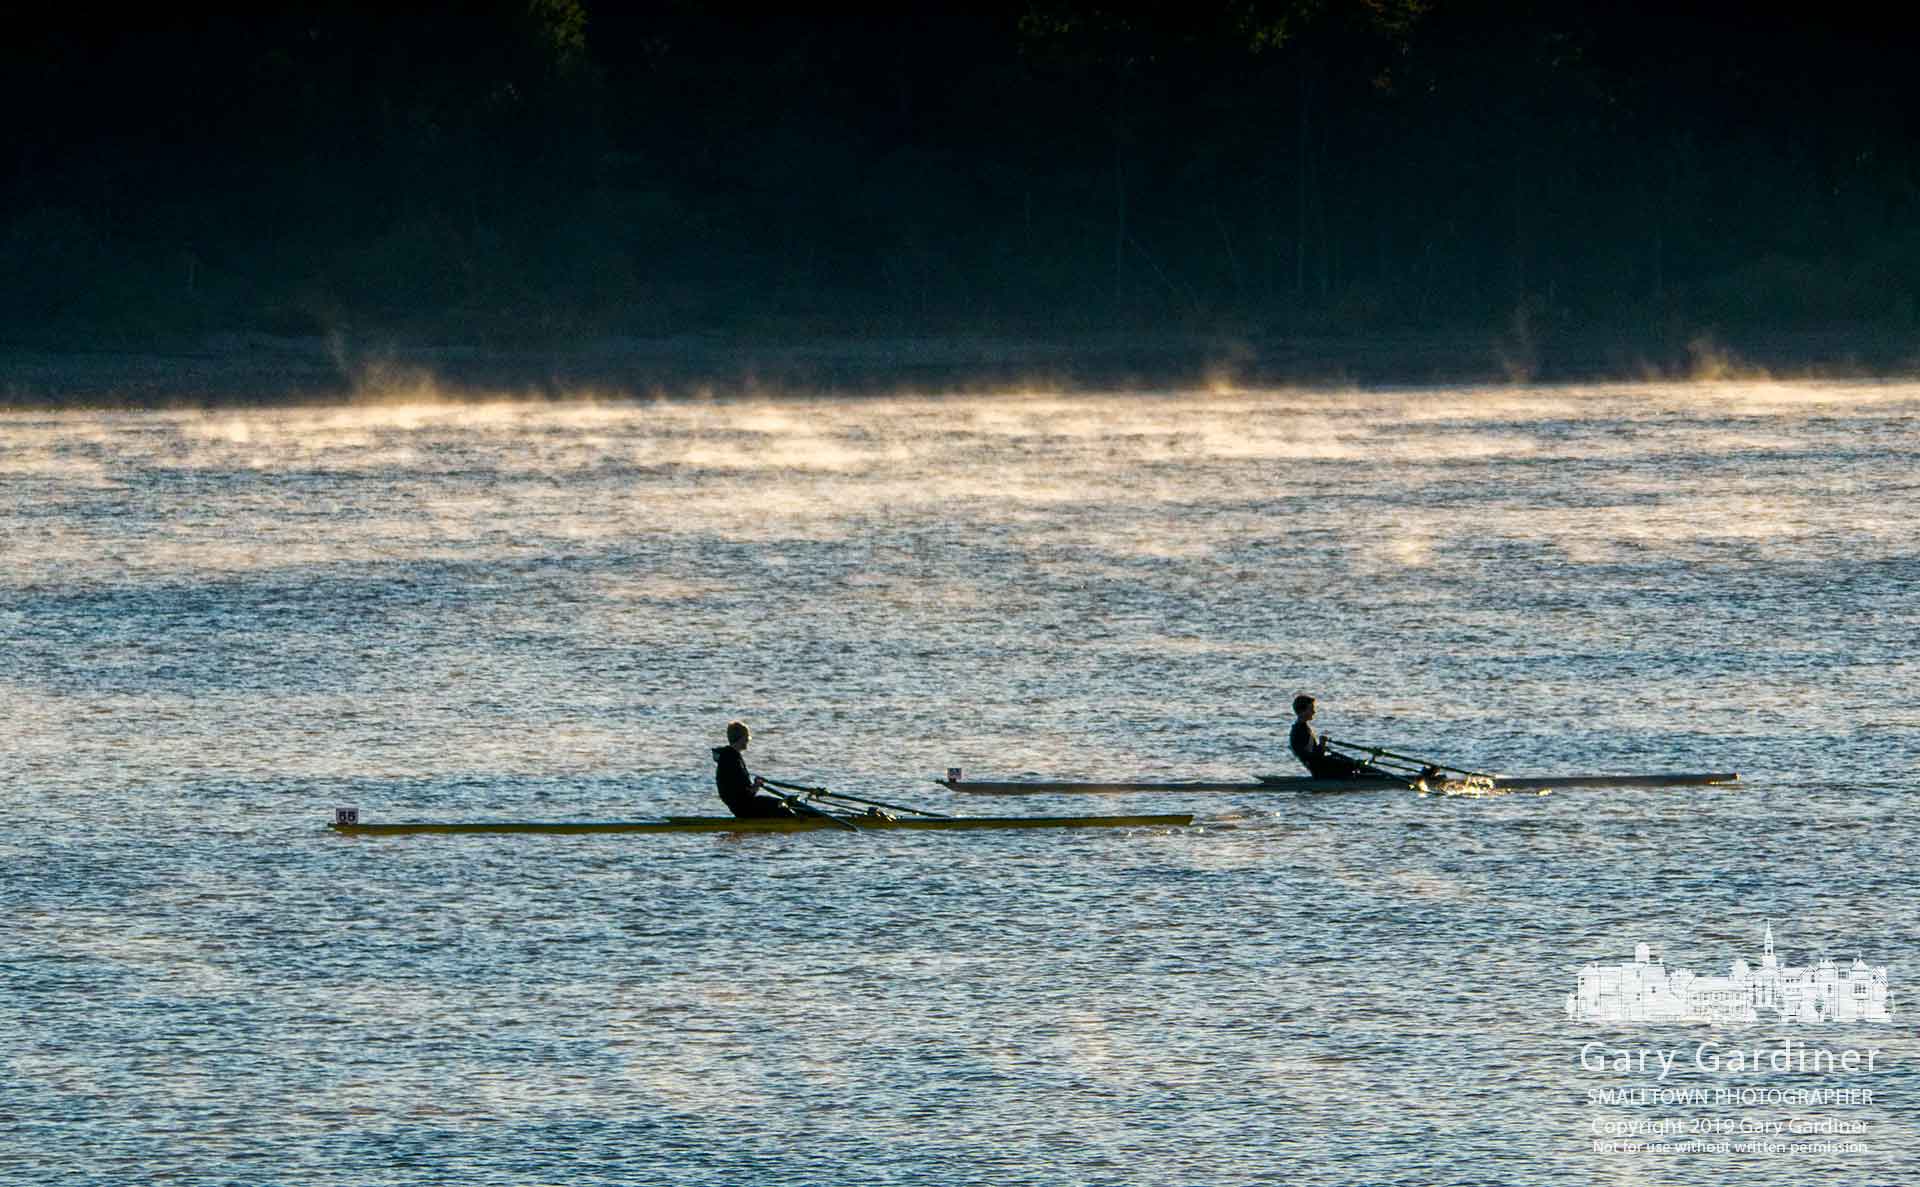 A pair of rowers move into position for the start of one of the races in The Hoover - Columbus Fall Classic rowing regatta Saturday morning on Hoover Reservoir. My Final Photo for Oct. 12, 2019.